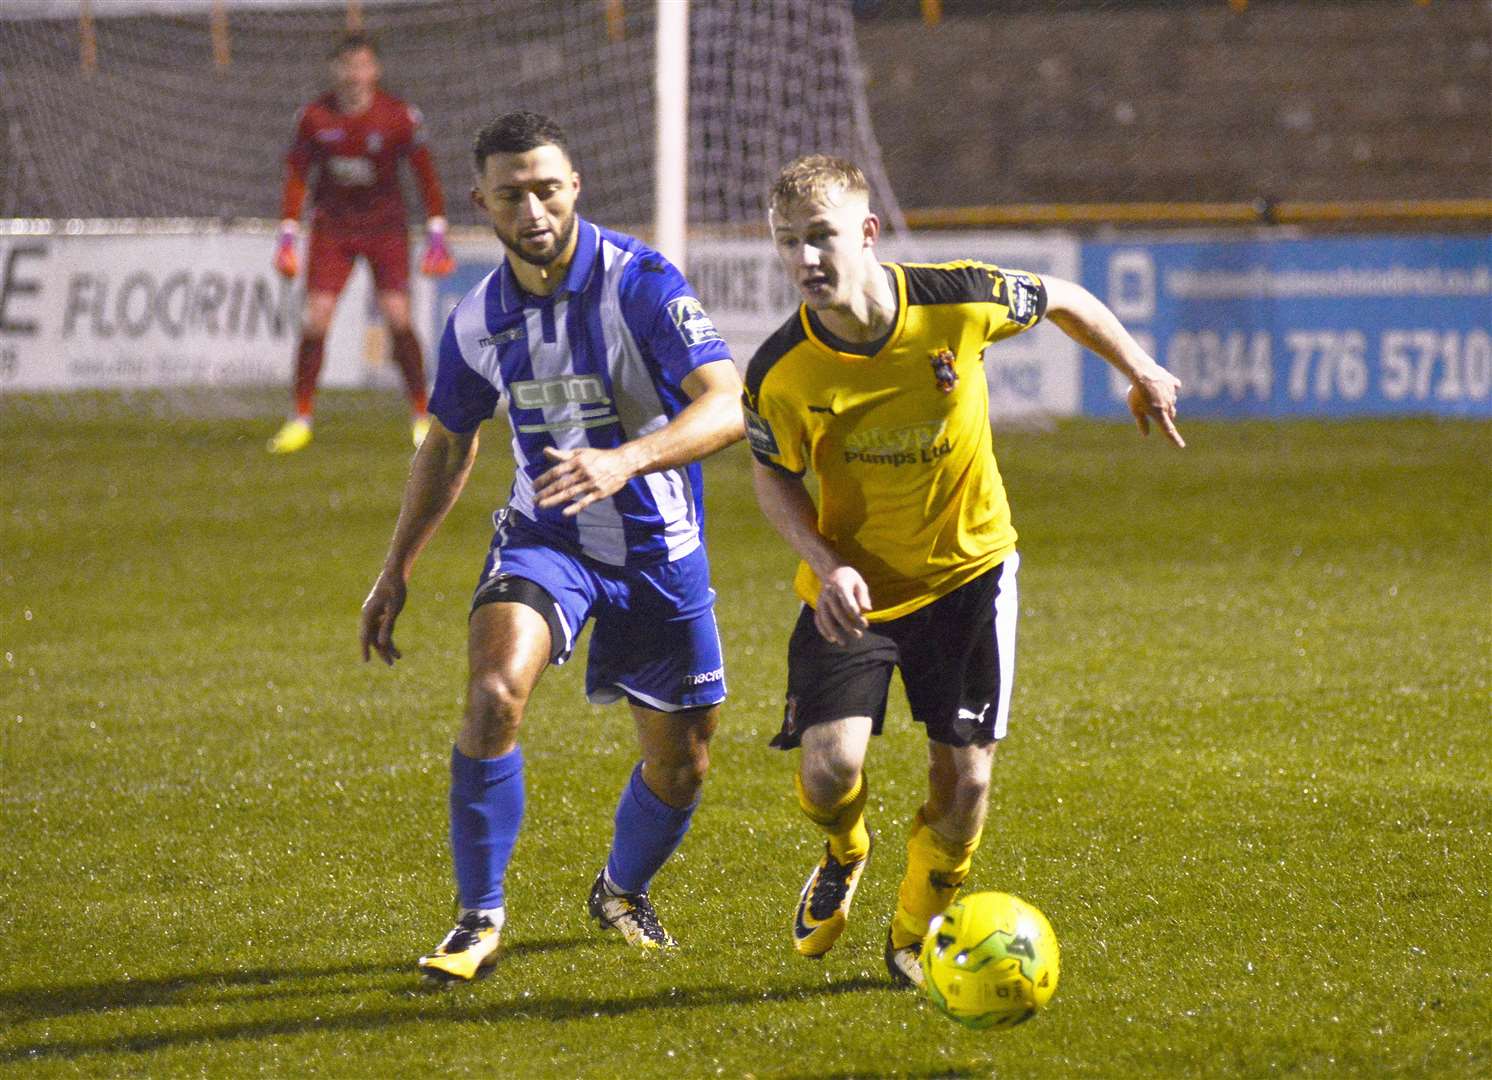 Alfie Paxman on the ball for Folkestone against Bishop's Stortford Picture: Paul Amos